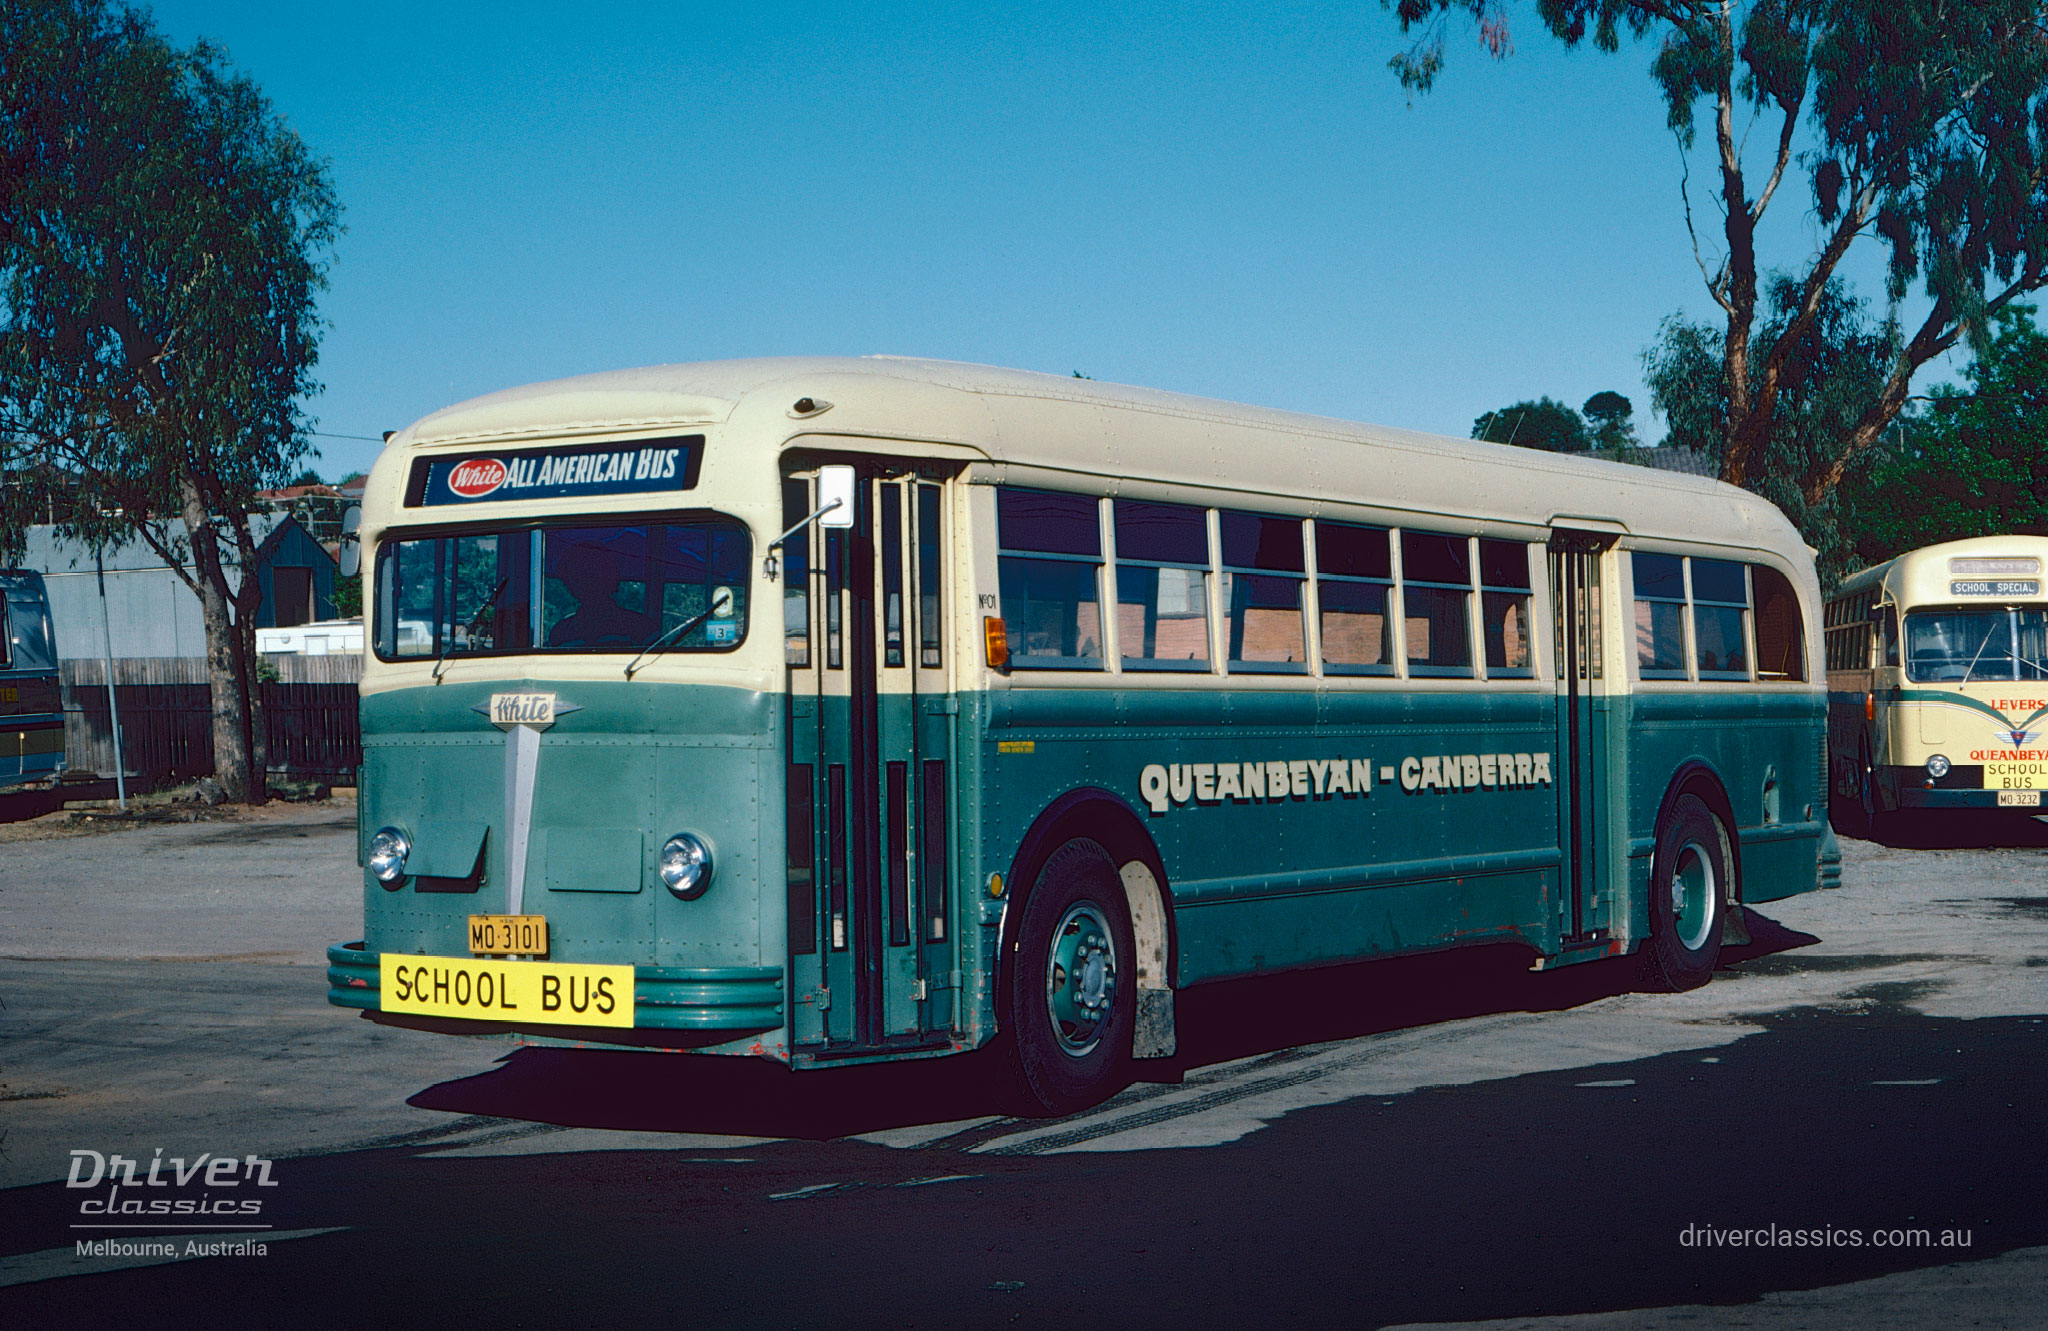 White 798-12 bus, 1948 model, Lever Coach Lines, preparing for a school service. Photo Taken in Queanbeyan NSW in November 1982.